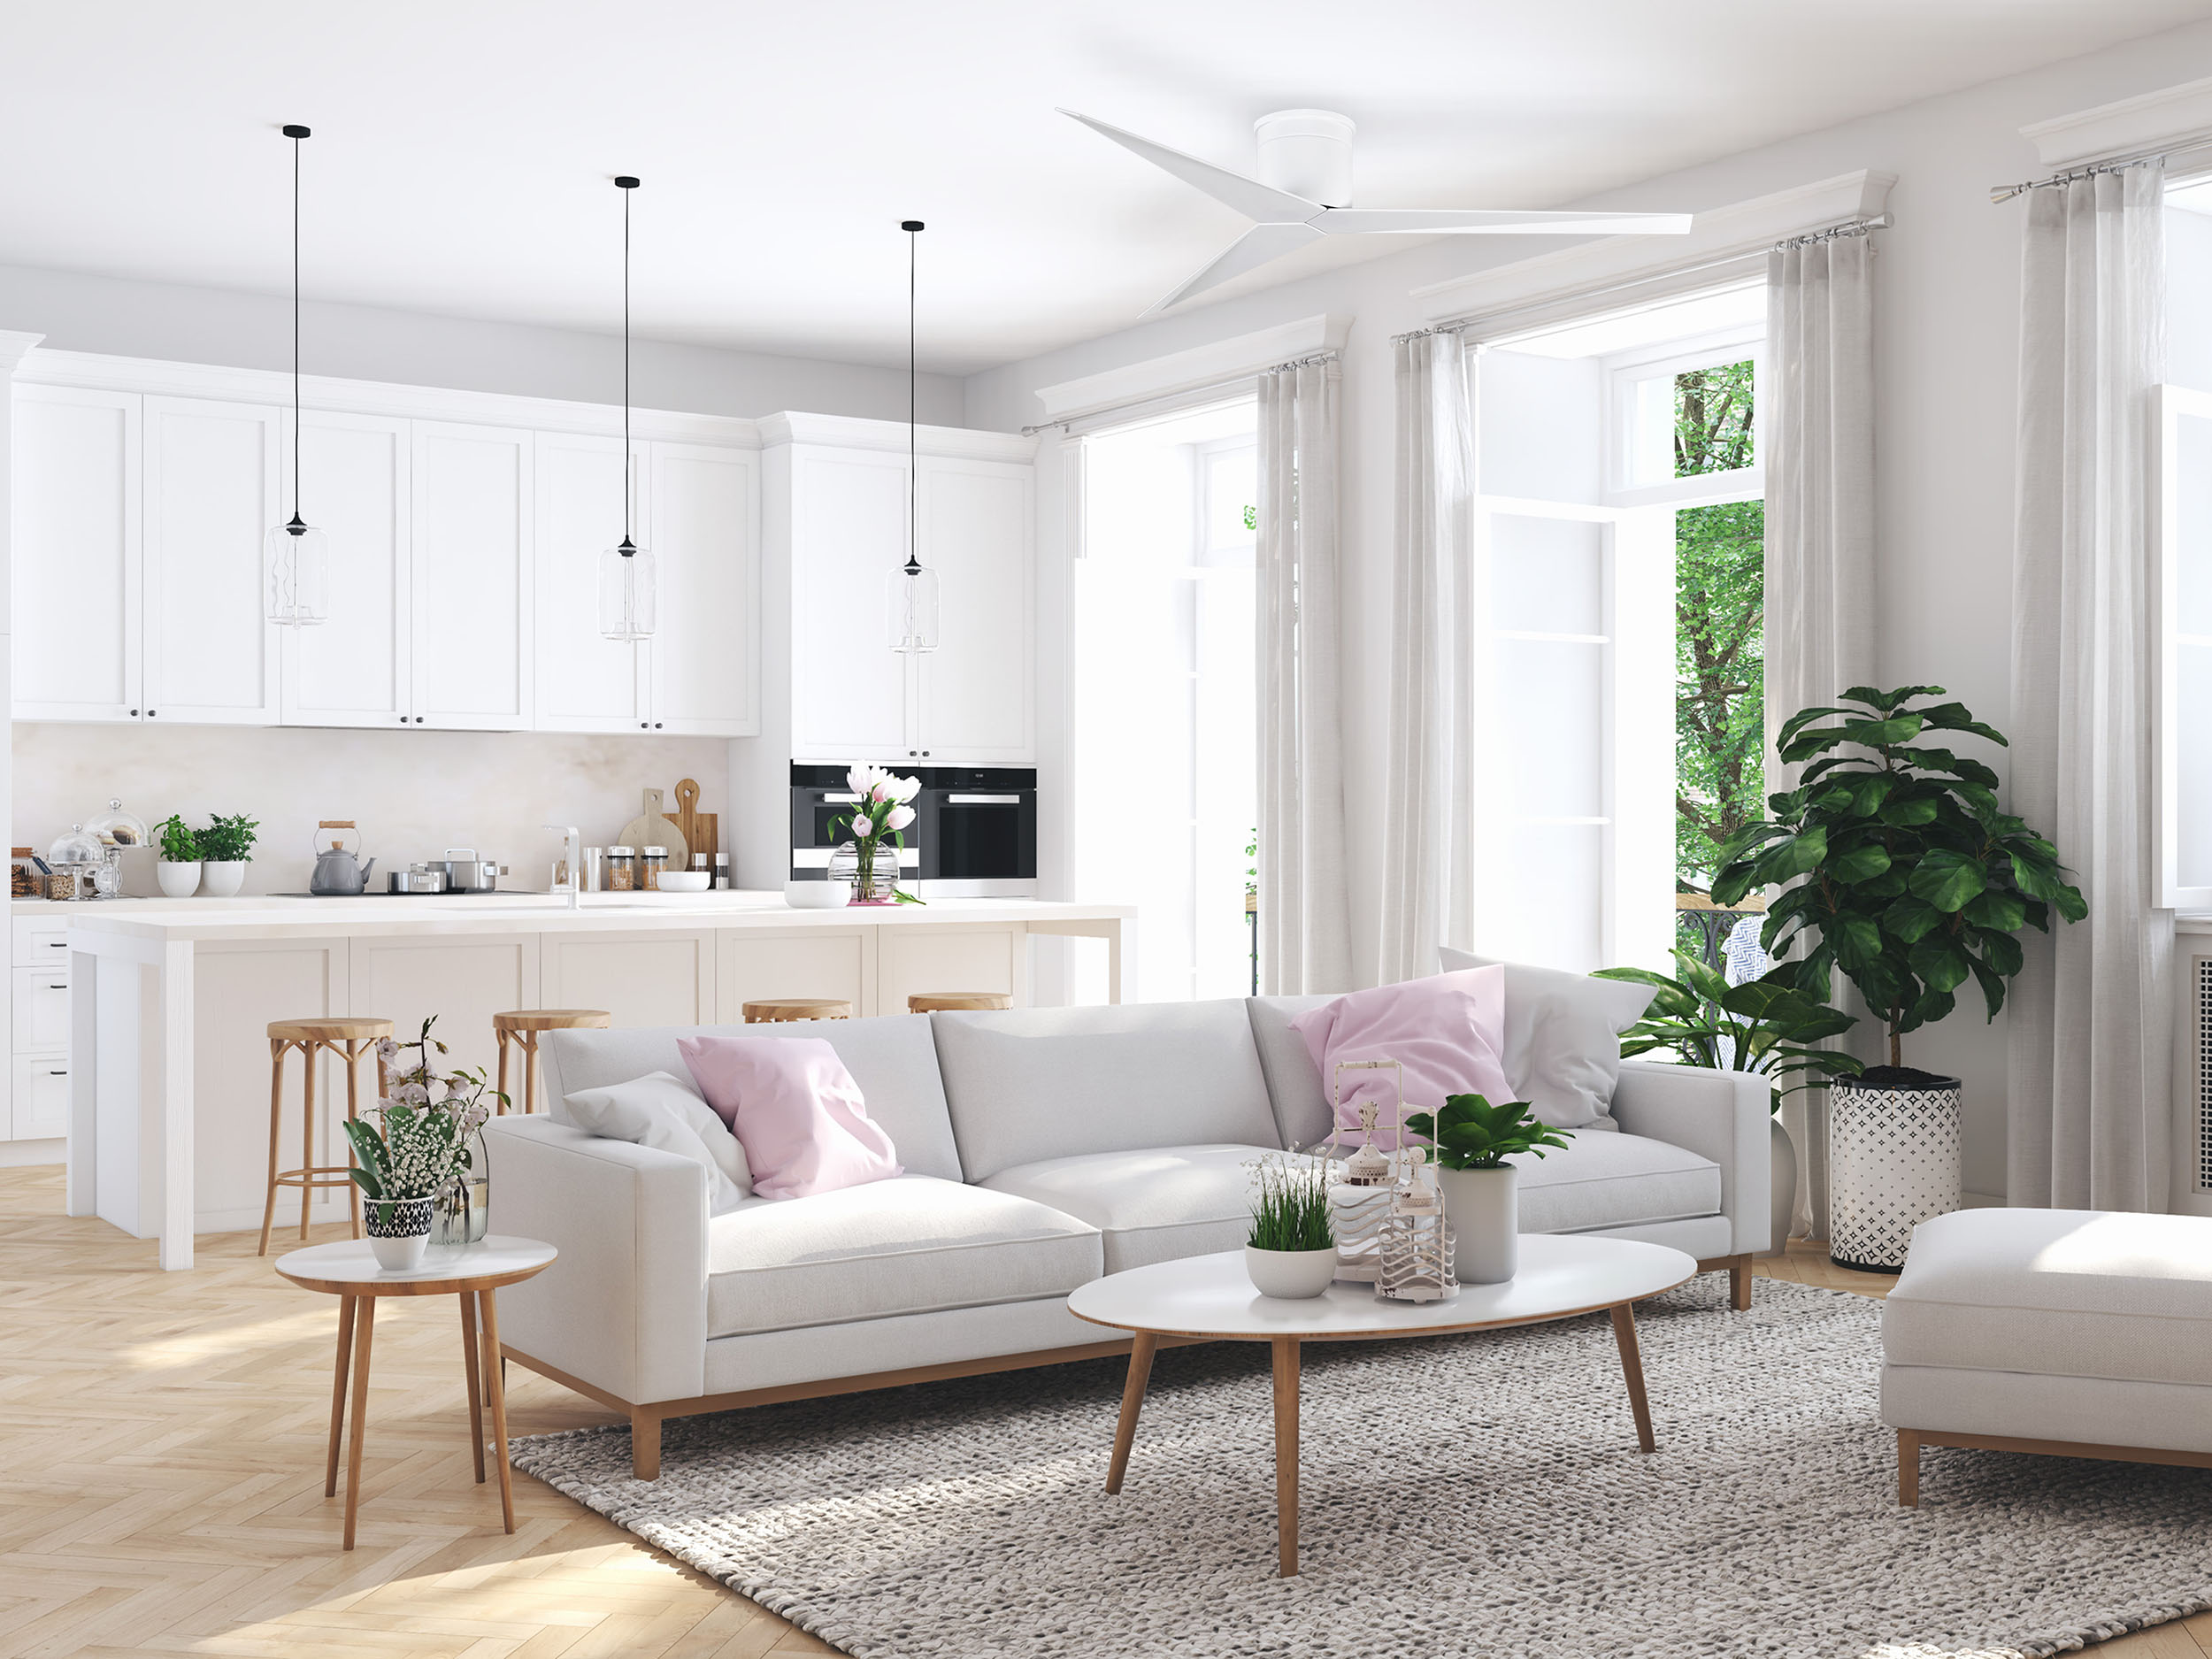 Eliza-H ceiling fan in Gloss White with Gloss White blade options.